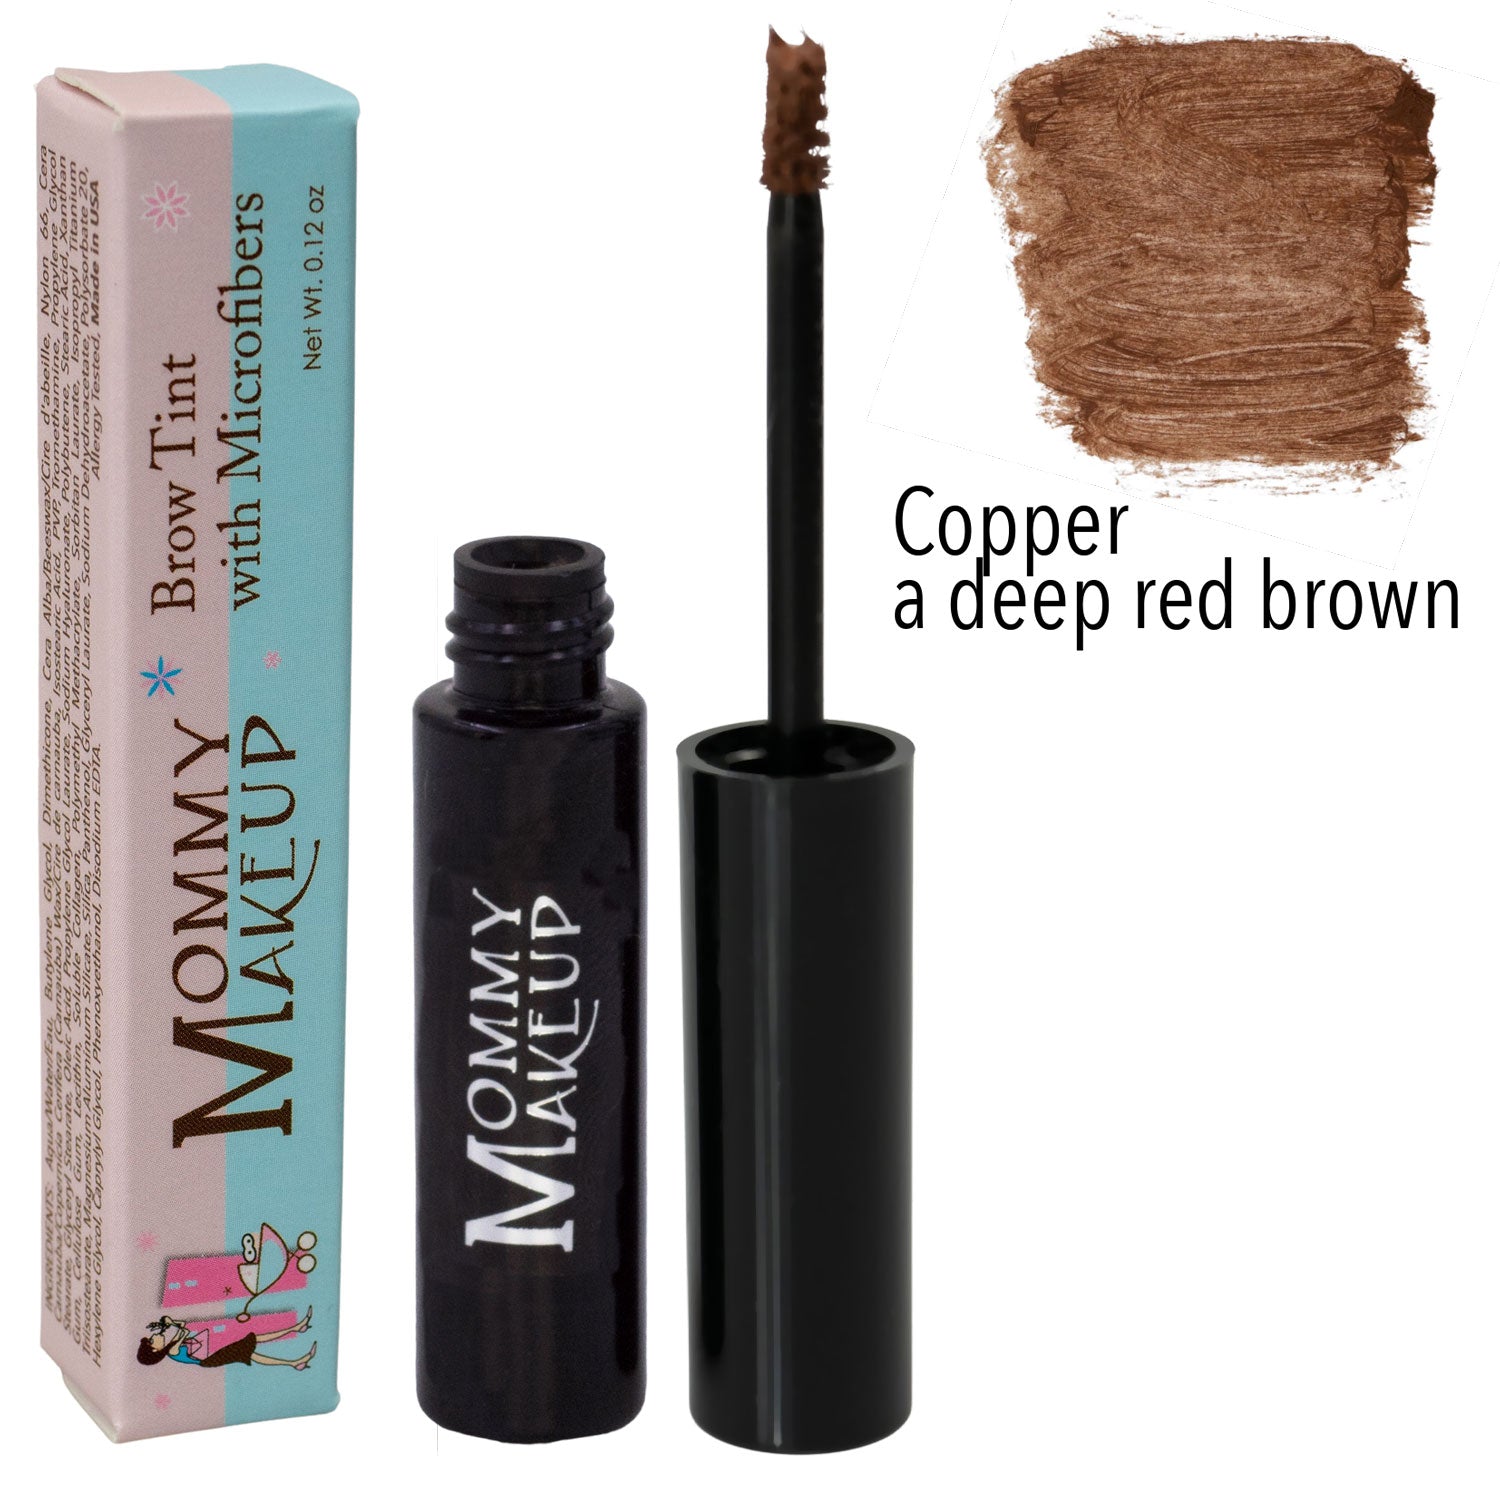 Brow Tint with Microfibers - Copper by Mommy Makeup for a balanced and bright eye! Tinted Eyebrow Gel. Clump-free, paraben-free, talc free, allergy tested, PETA certified cruelty free.